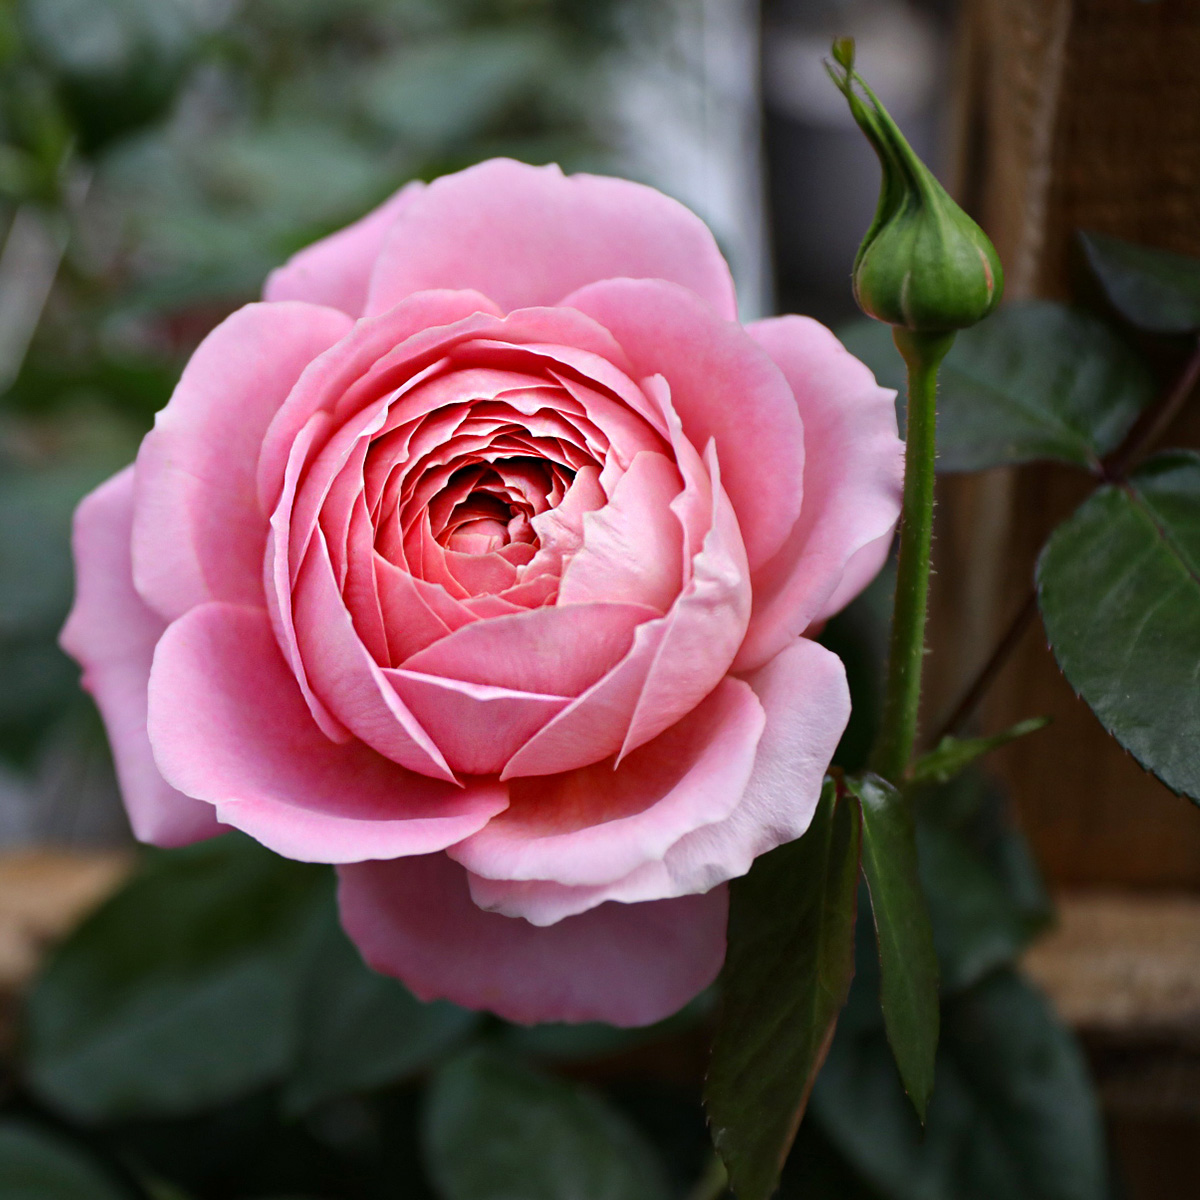 Timing Is Everything When It Comes to Harvesting Garden Roses 11